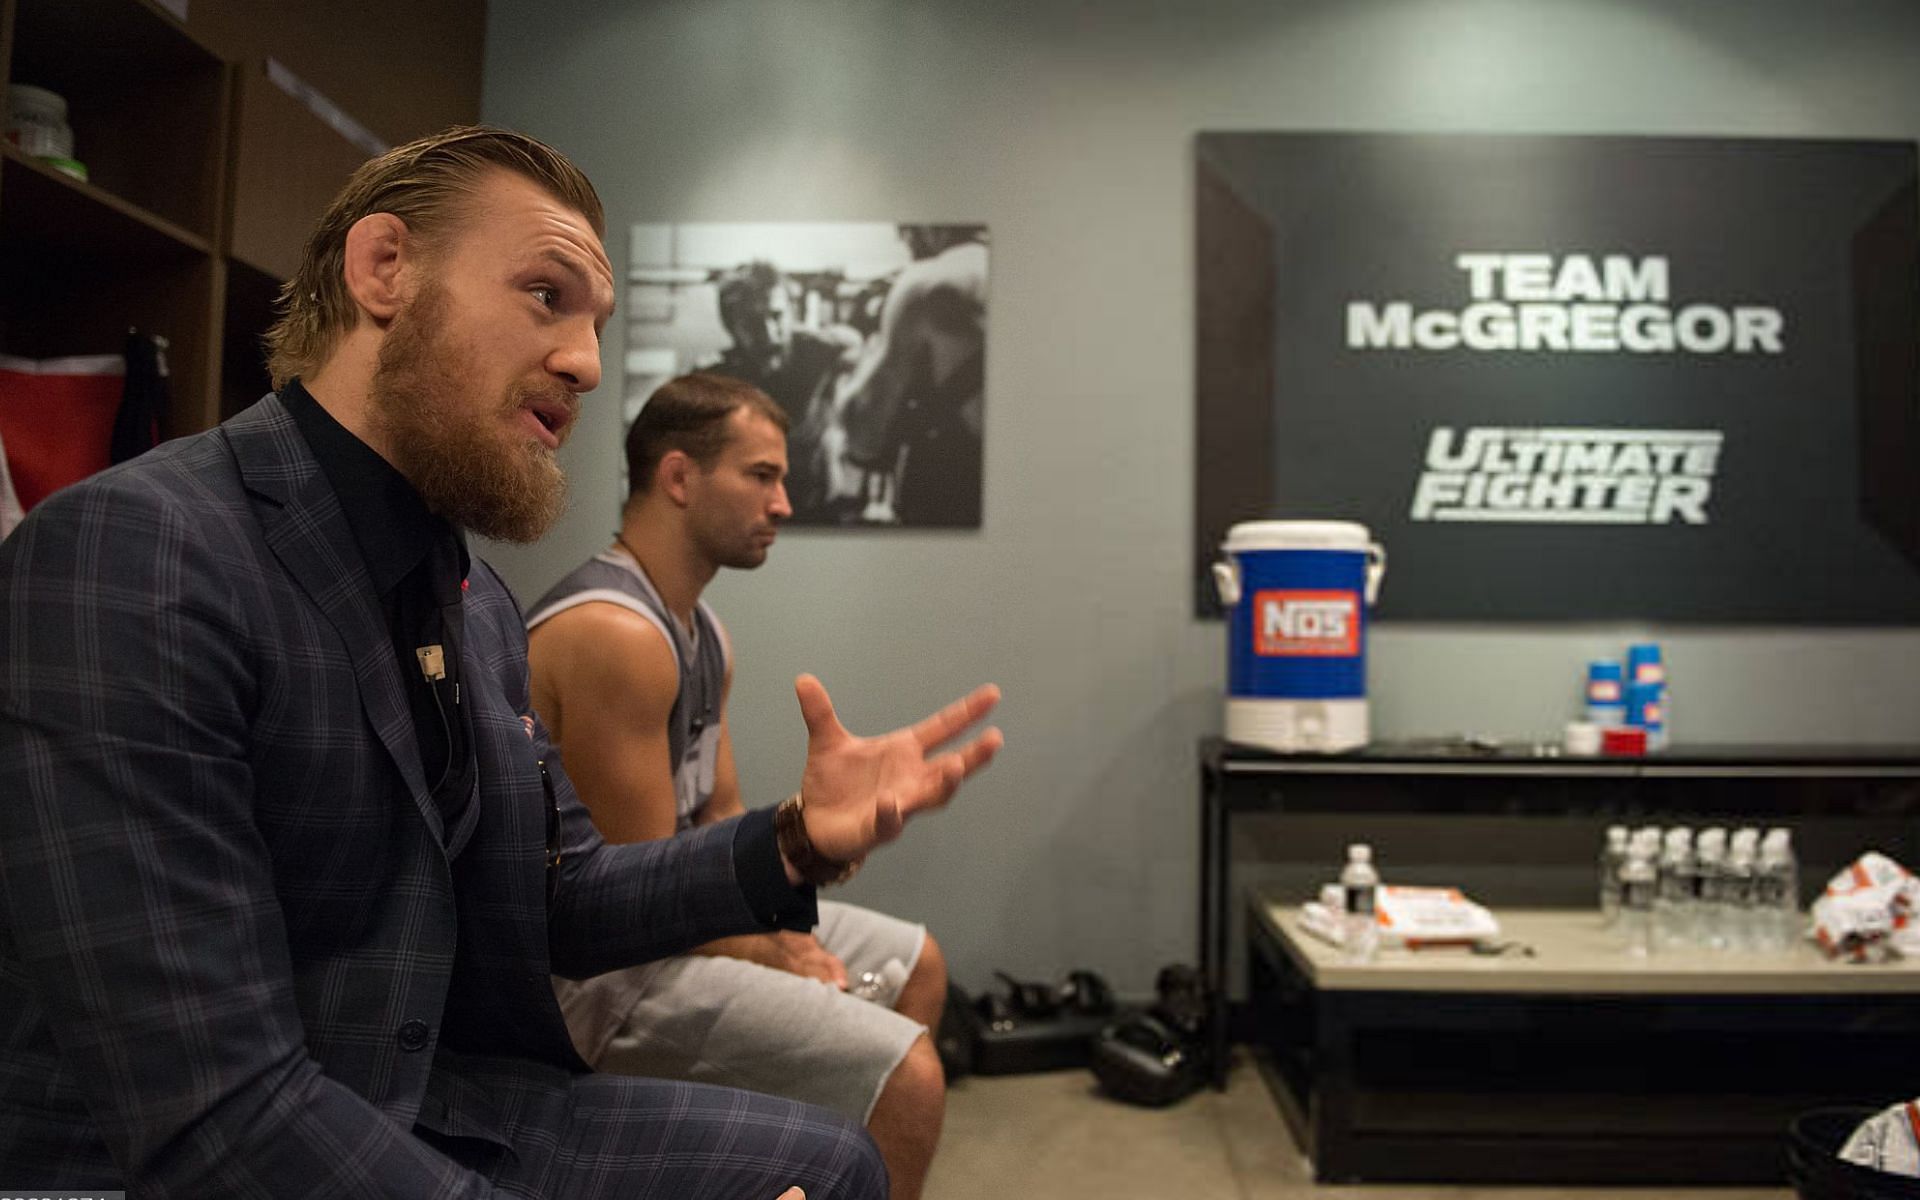 Former UFC lightweight champion eager to face Conor McGregor in TUF